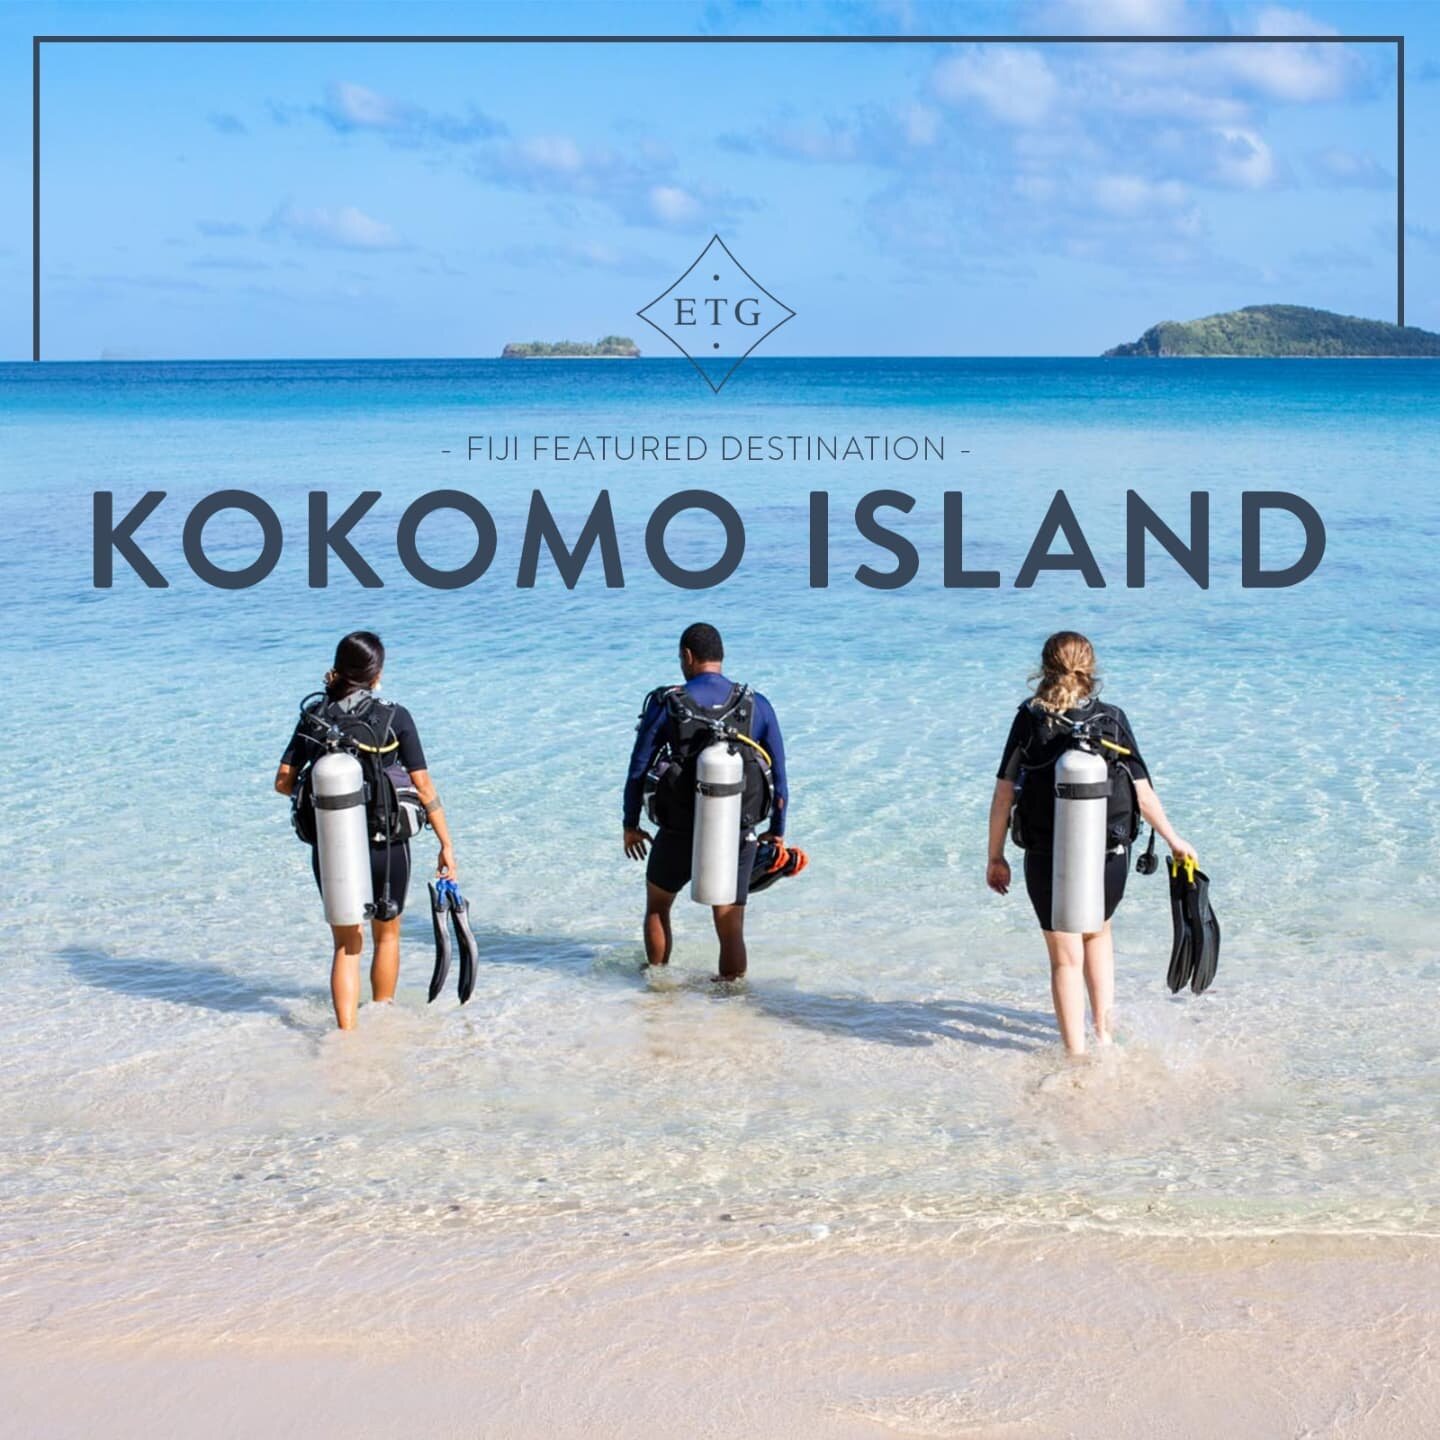 A short seaplane from Nadi, Kokomo Private Island Fiji is a place with just as much emphasis on the natural beauty of the landscape as there is on the resort. Famous for its affable and welcoming Fijian hospitality, this luxury paradise is ideal to c